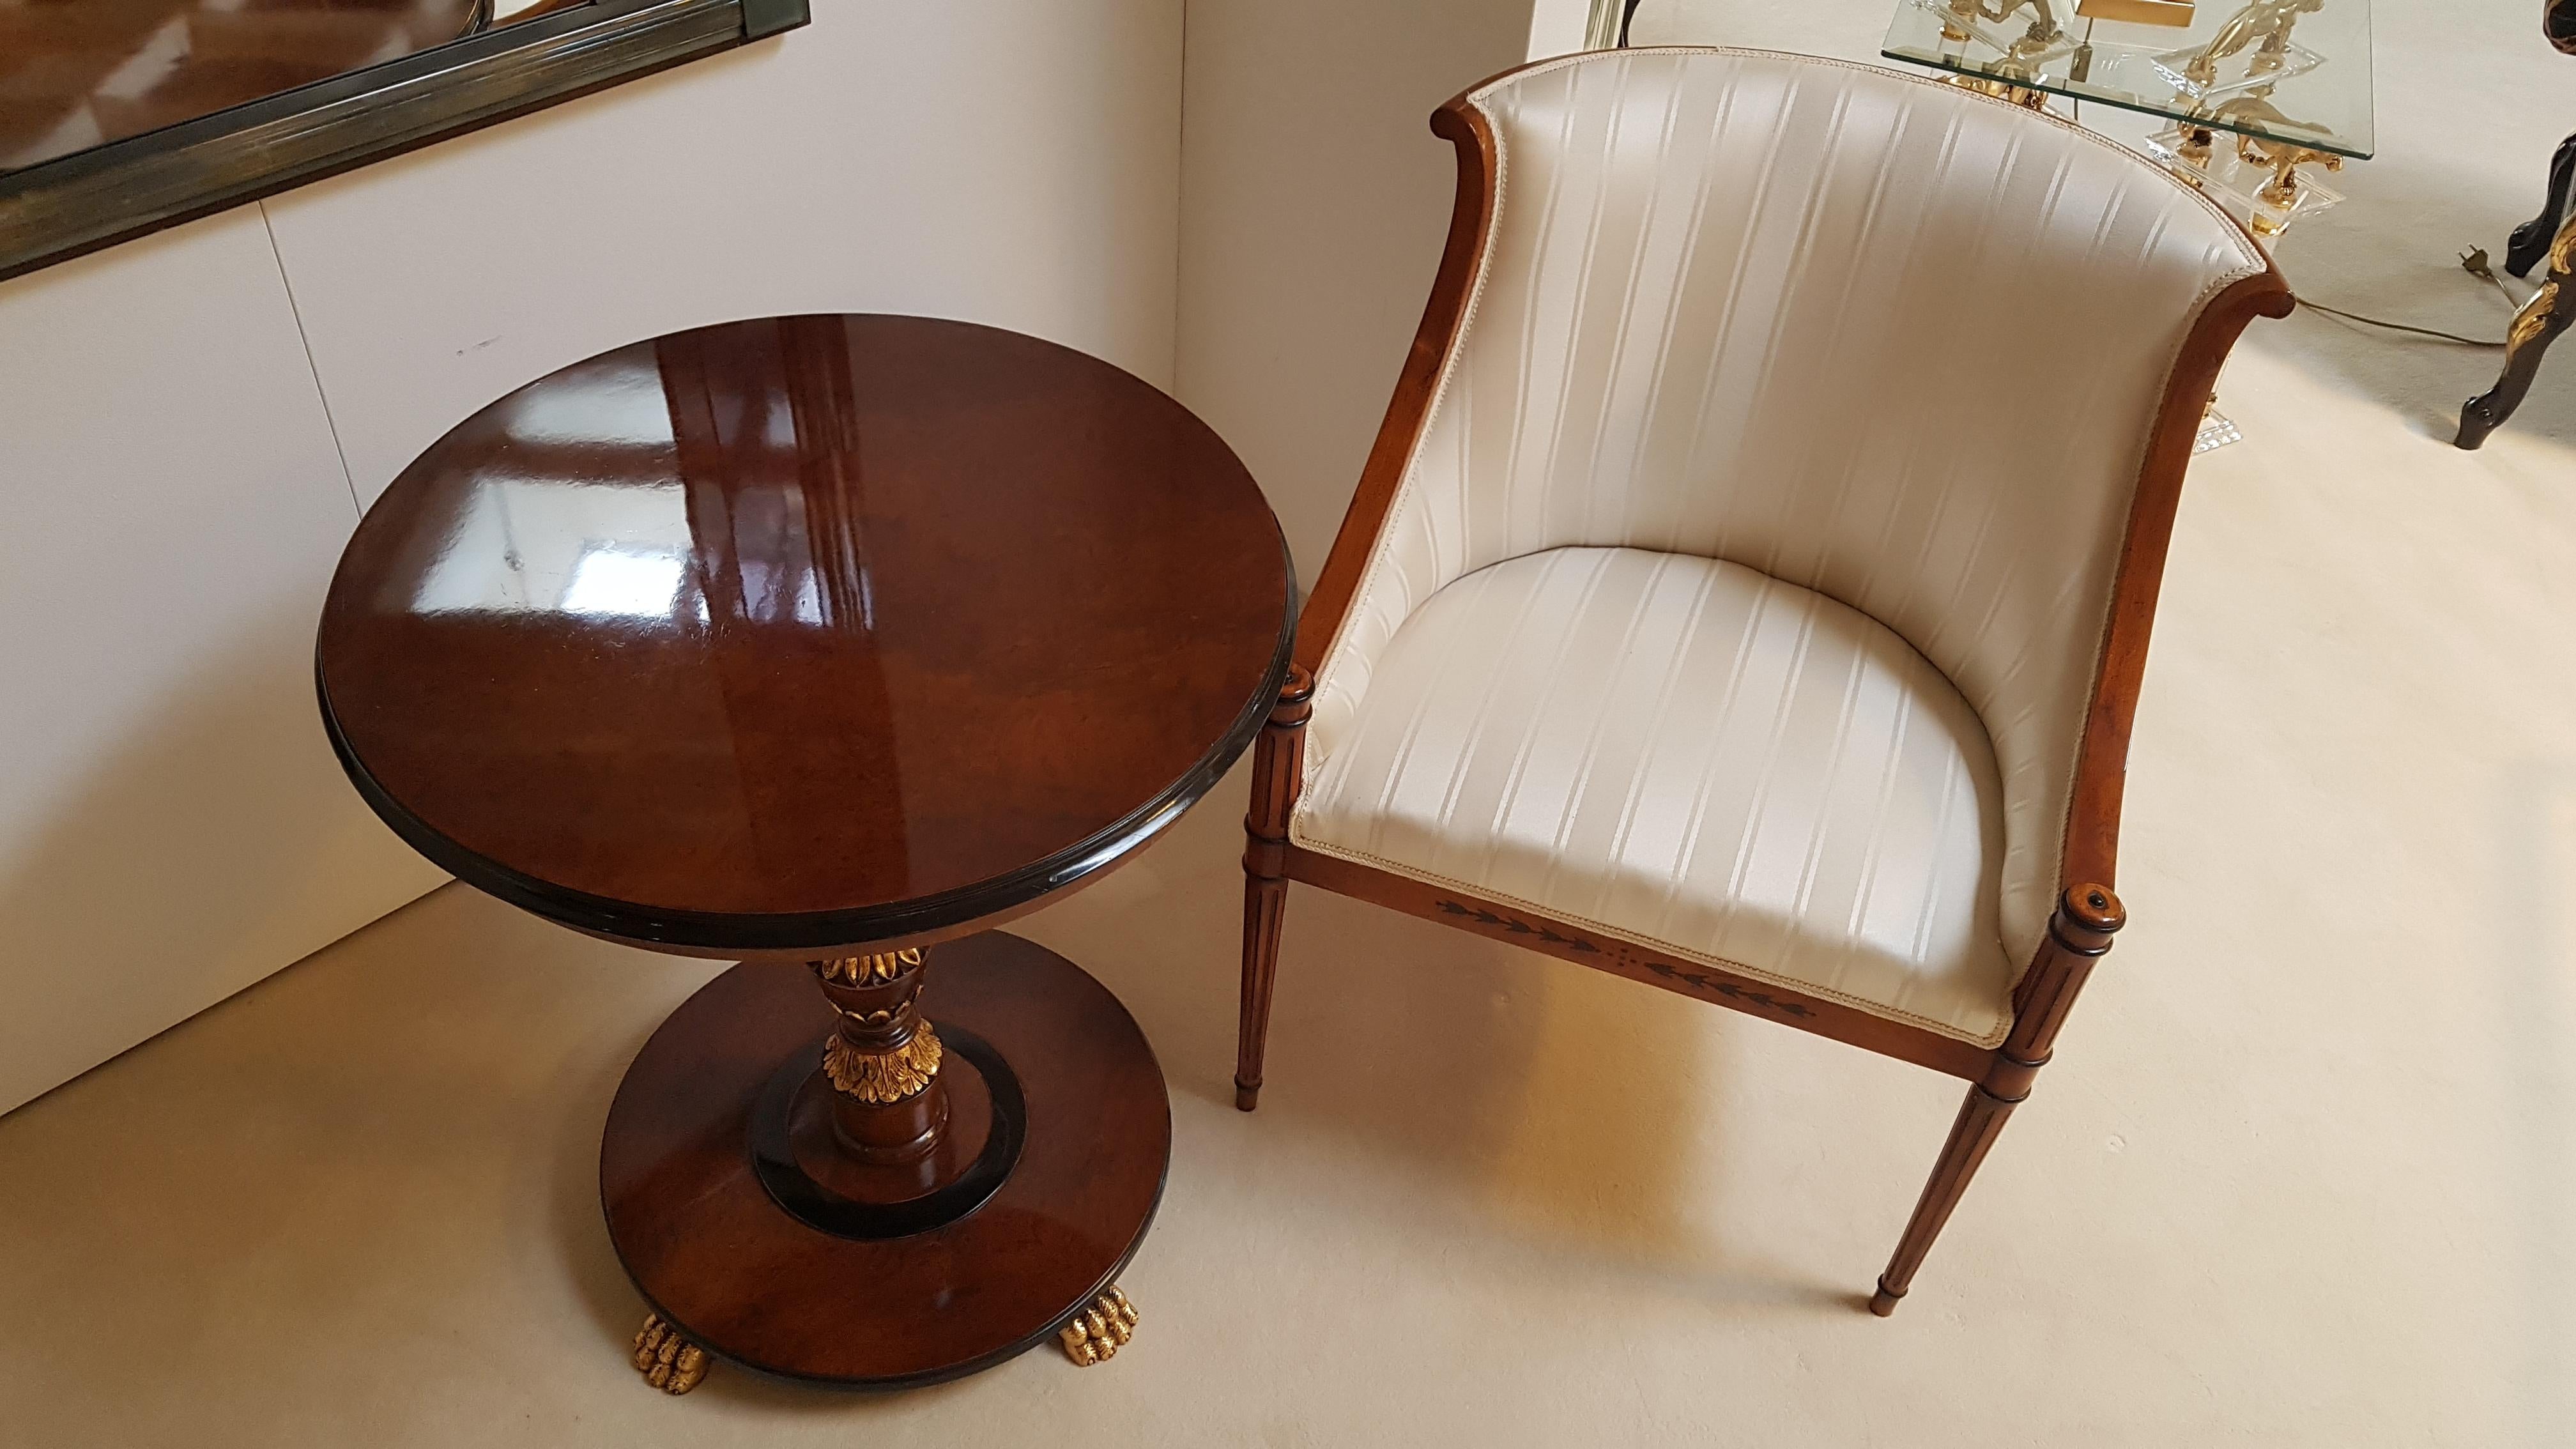 Elegant Biedermeier style armchair and side table / end table set made of luxurious cherry wood. The armchair with curved legs is covered with a two tone crème white fabric and features a typical Biedermeier style design. On the side table you will